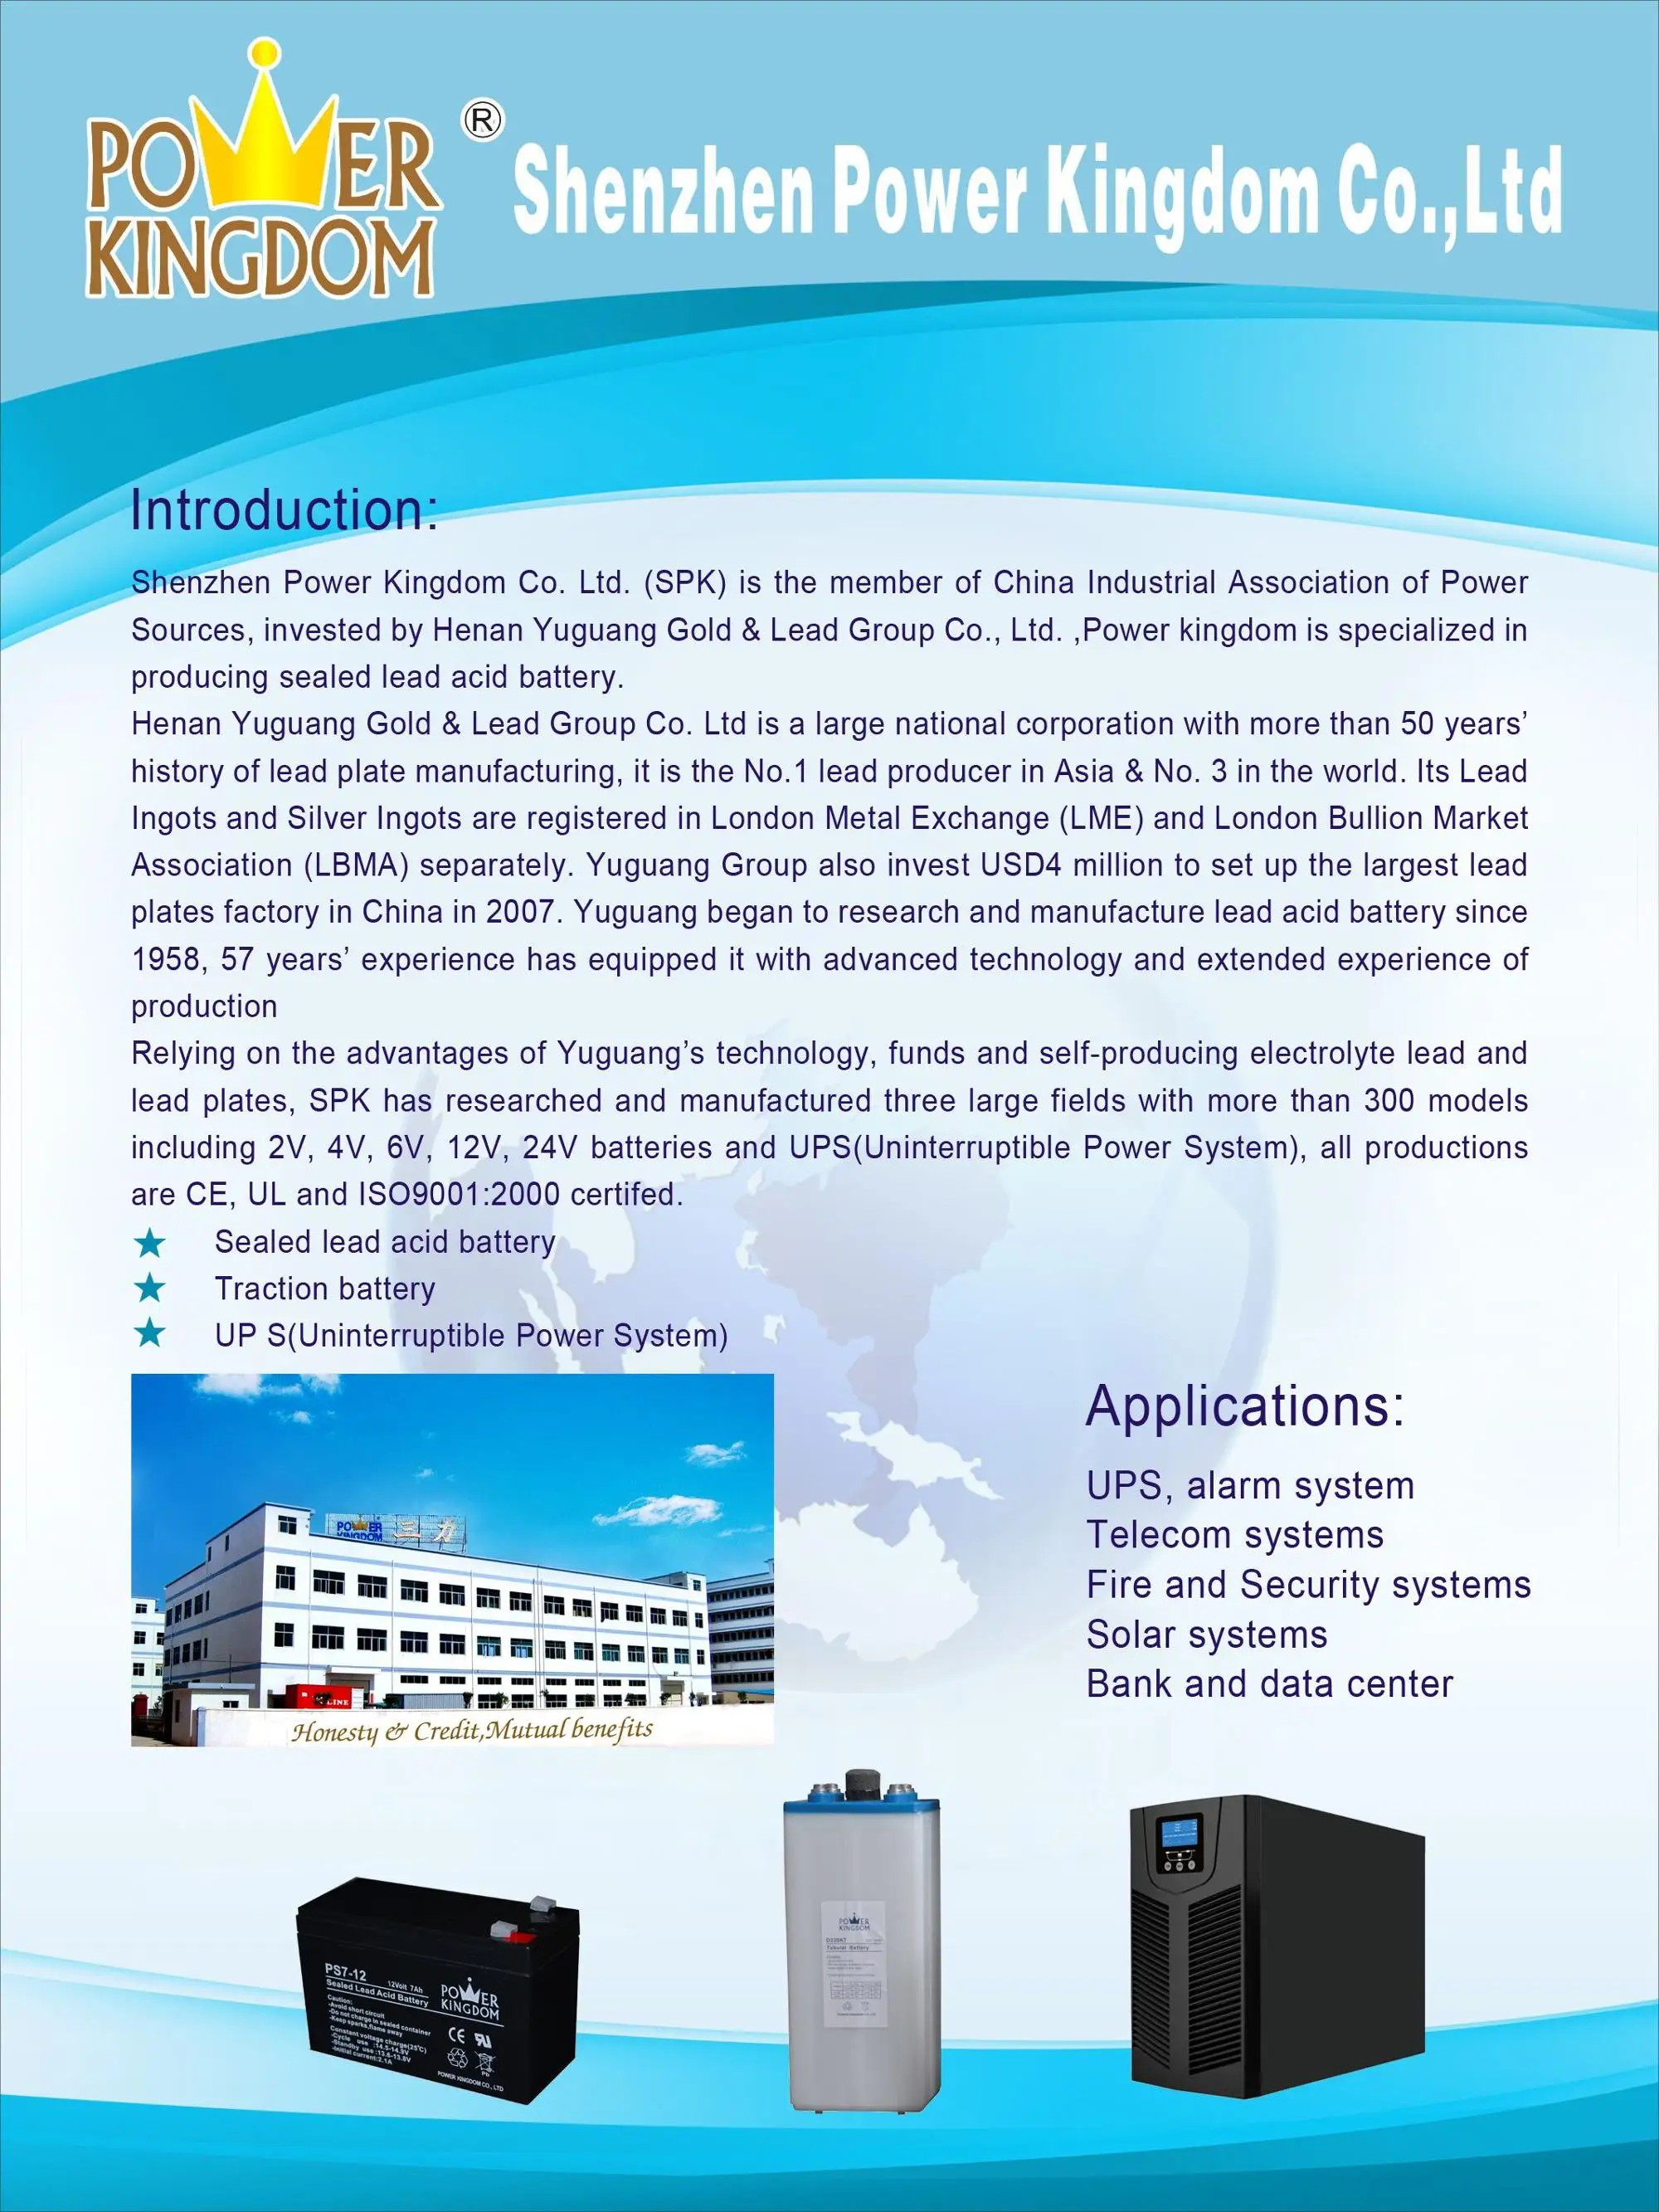 Power Kingdom group 34 agm battery for business wind power systems-5